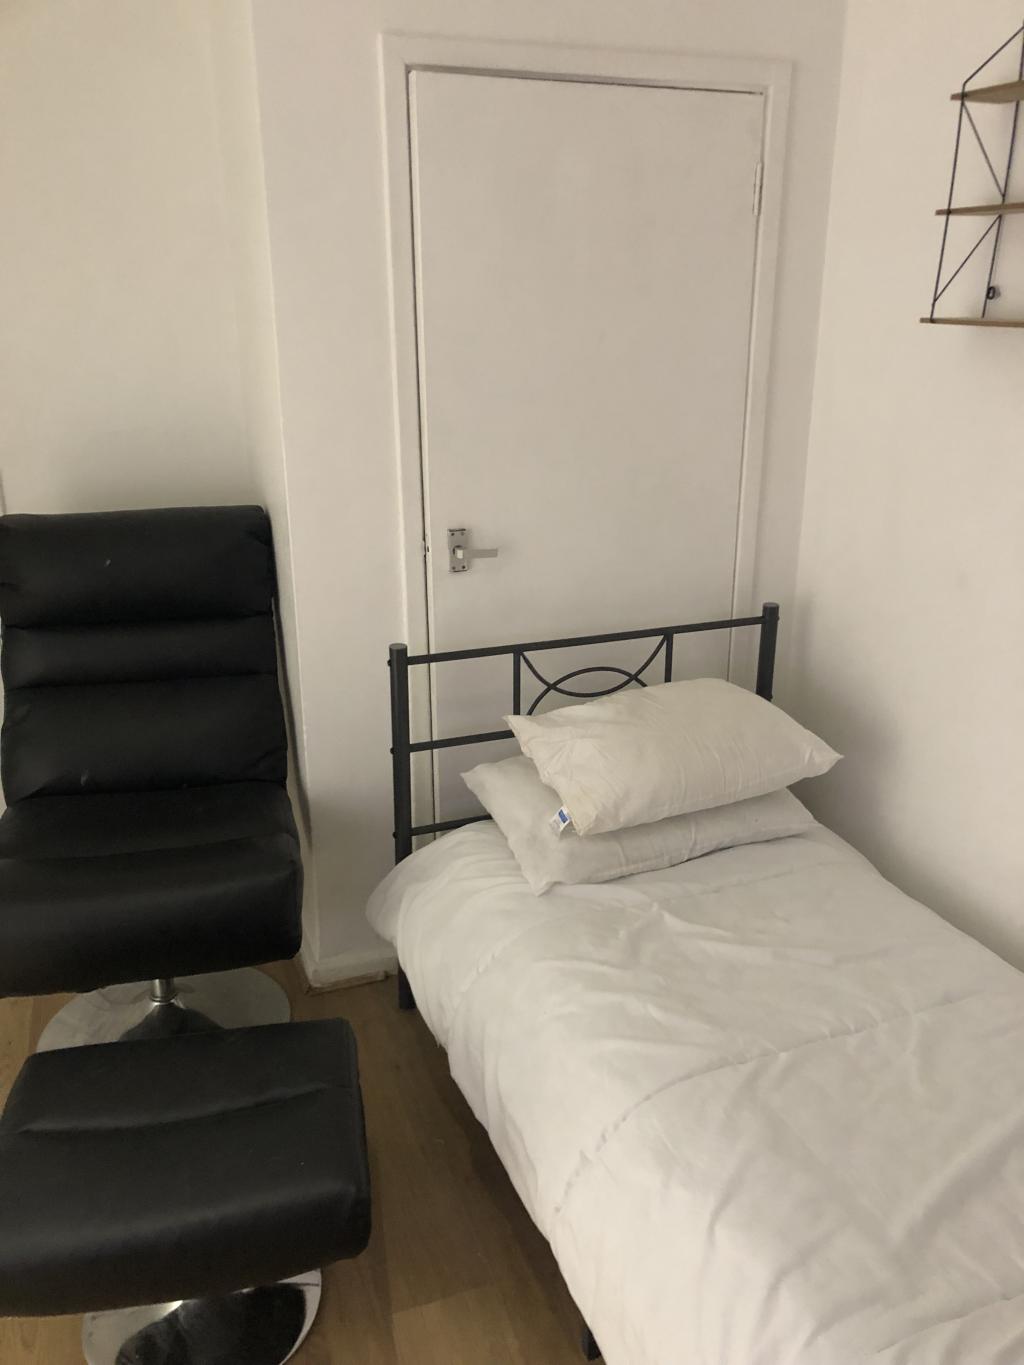 Amazing rooms for female in london 3 Image